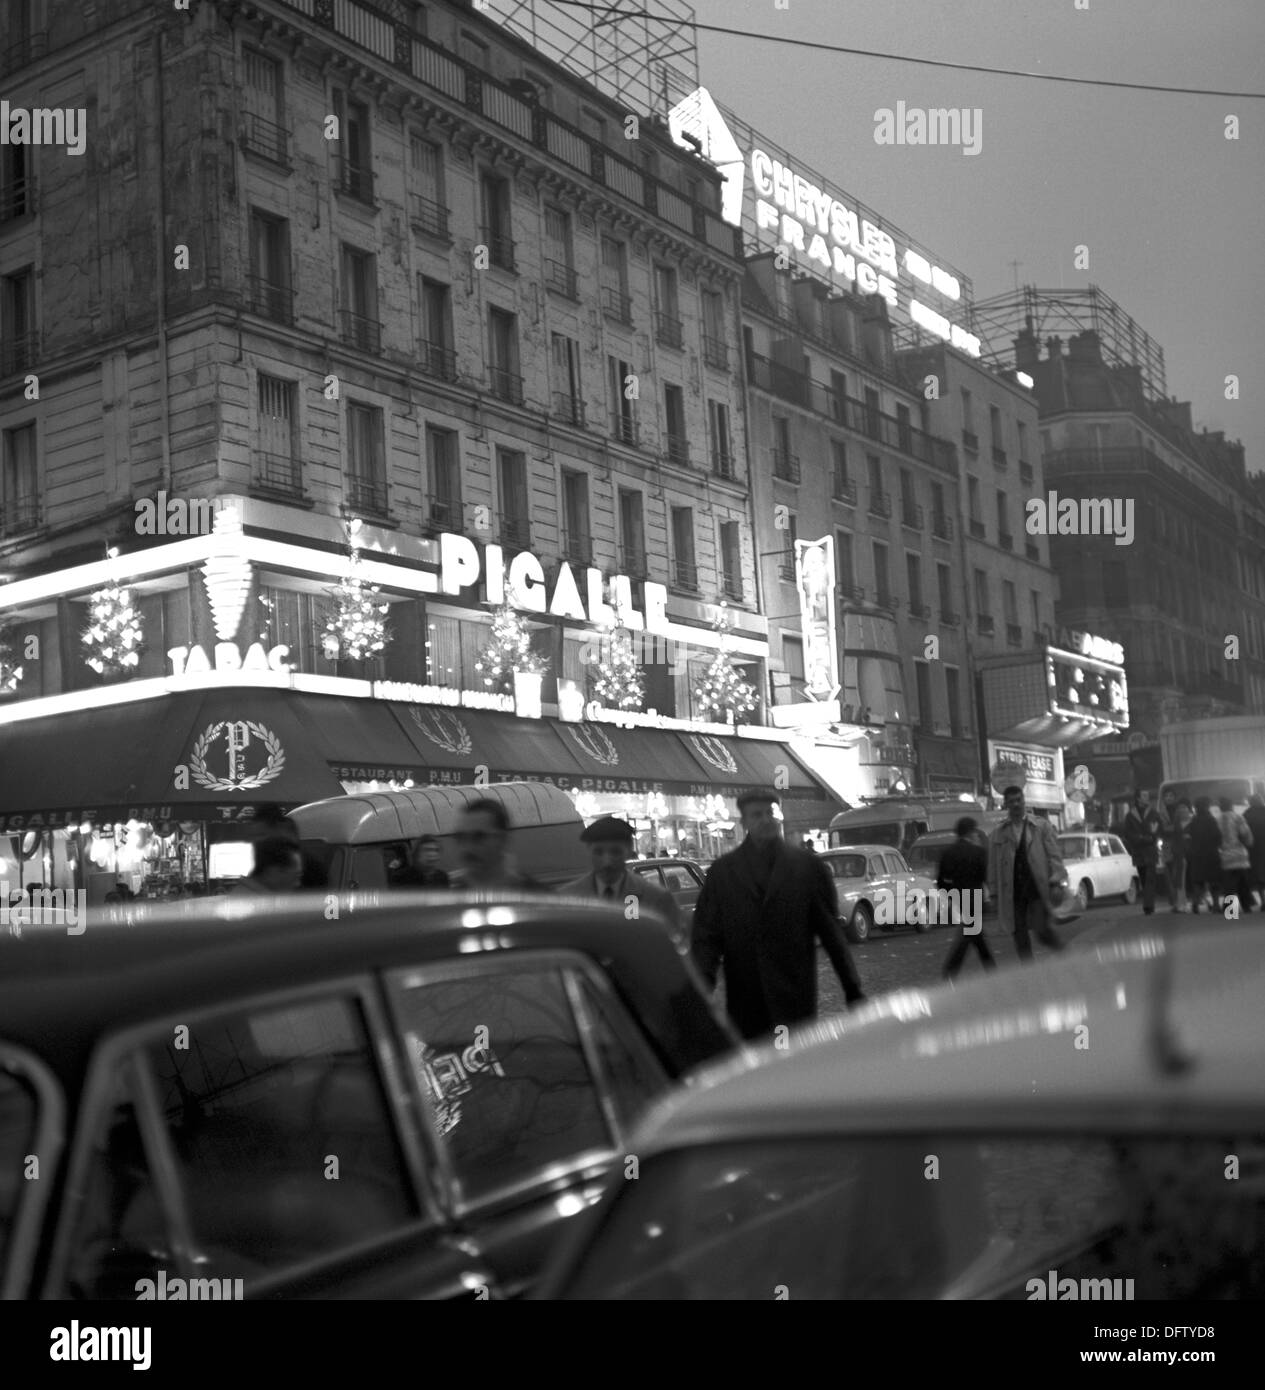 View fo the restaurant Pigalle at the square with the same name in the quarter Montmartre in Paris, France, In November 1970. To the right, an advertisement for Chrysler cars. The quarter is famous for, among other things, the Moulin Rough and the artists that used to live here. Photo: Wilfried Glienke Stock Photo